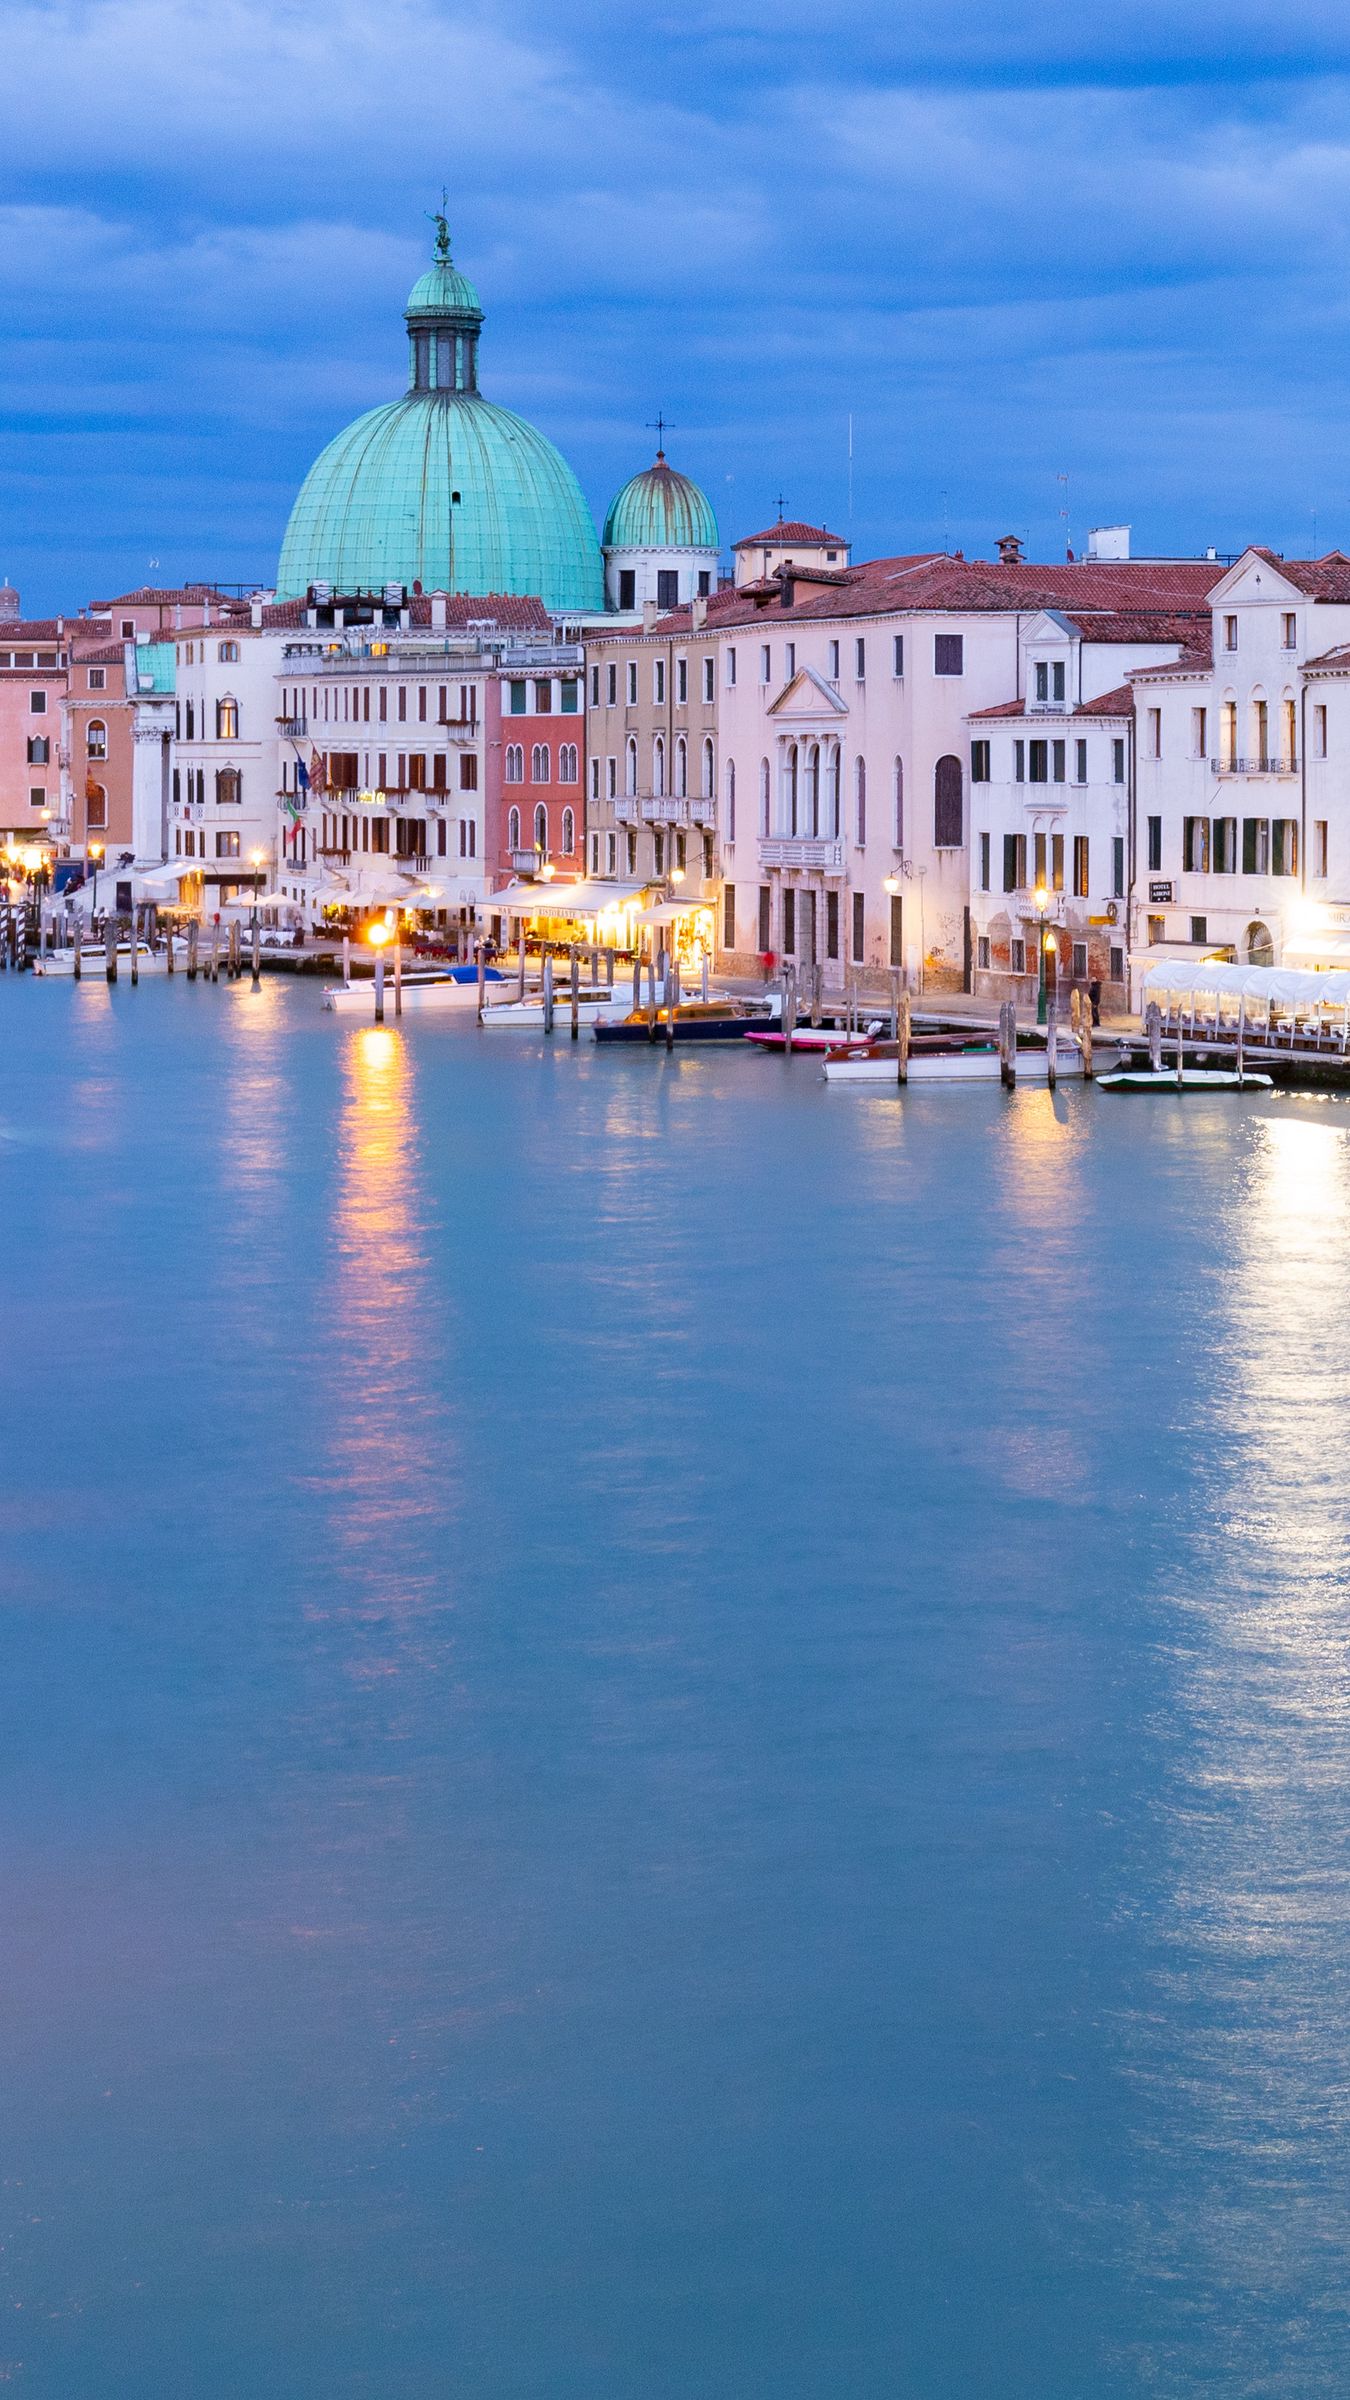 Download wallpaper 1350x2400 grand canal, venice, italy, canal, dome ...